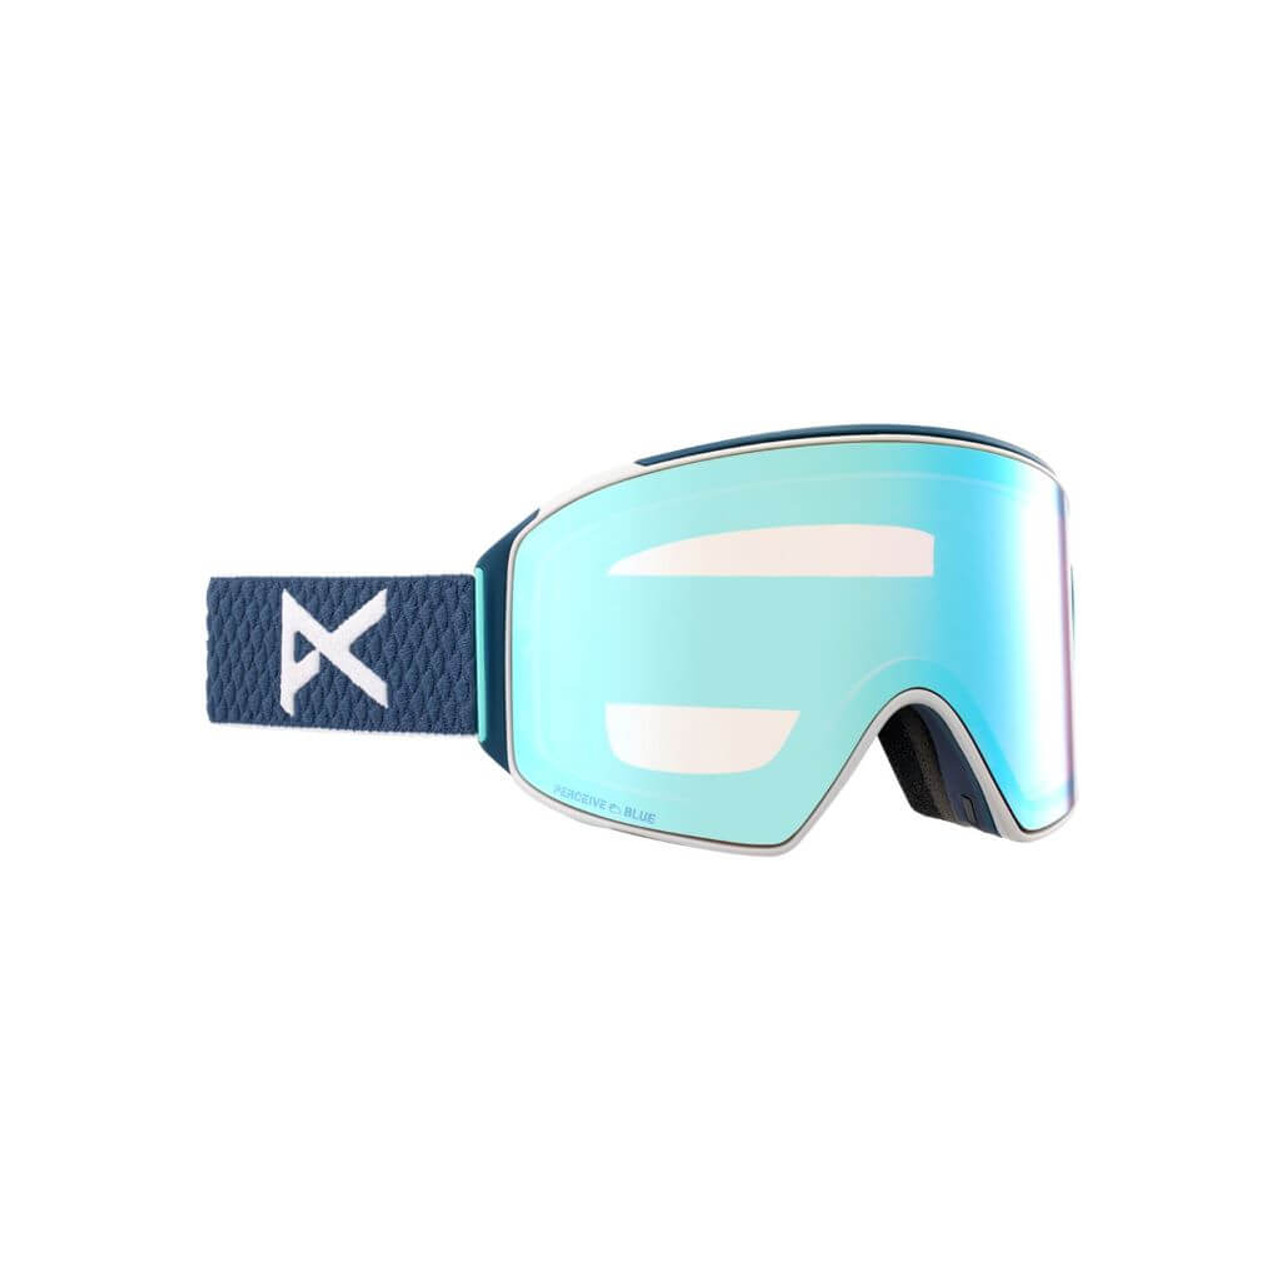 Nightfall w/Perceive Variable Blue - Anon M4 Cylindrical goggle